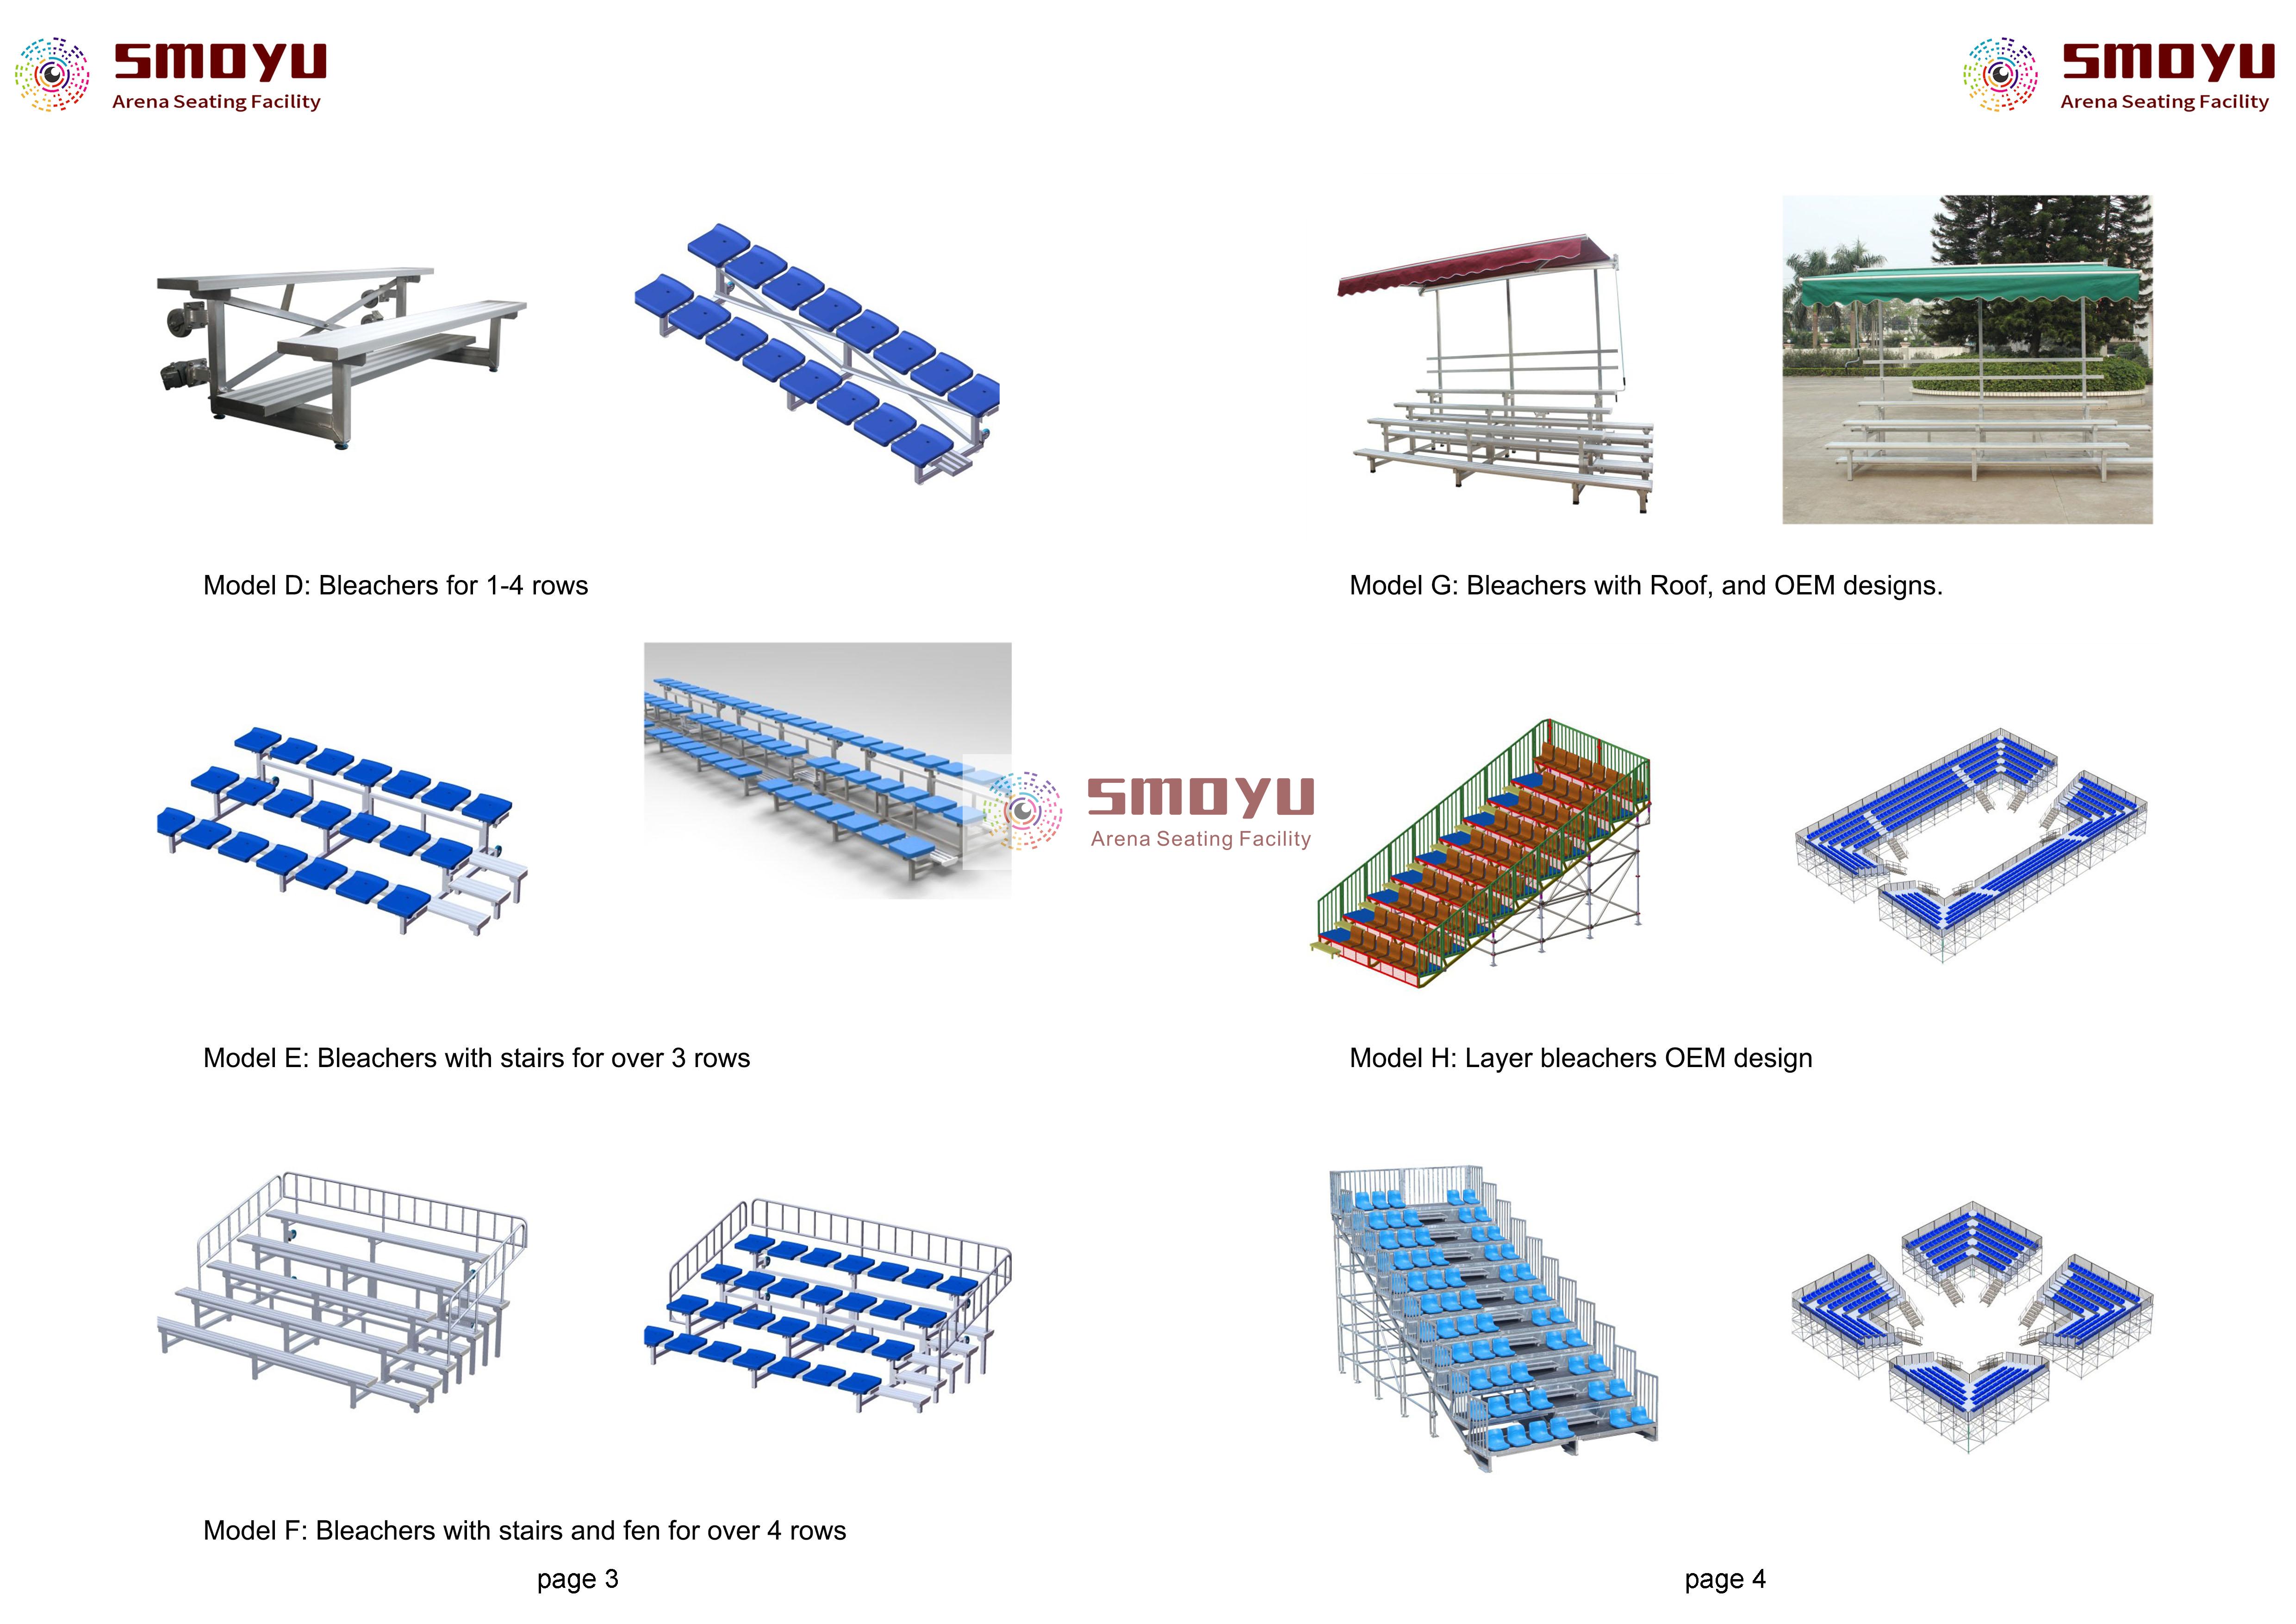 aluminum <a href=https://www.arena-seating.com/High-Back-rest-plastic-HDPE-material-stadium-seat-p.html target='_blank'>stadium seat</a>ing <a href=https://www.arena-seating.com/Bleachers-seats.html target='_blank'>grandstand</a>s bleachers